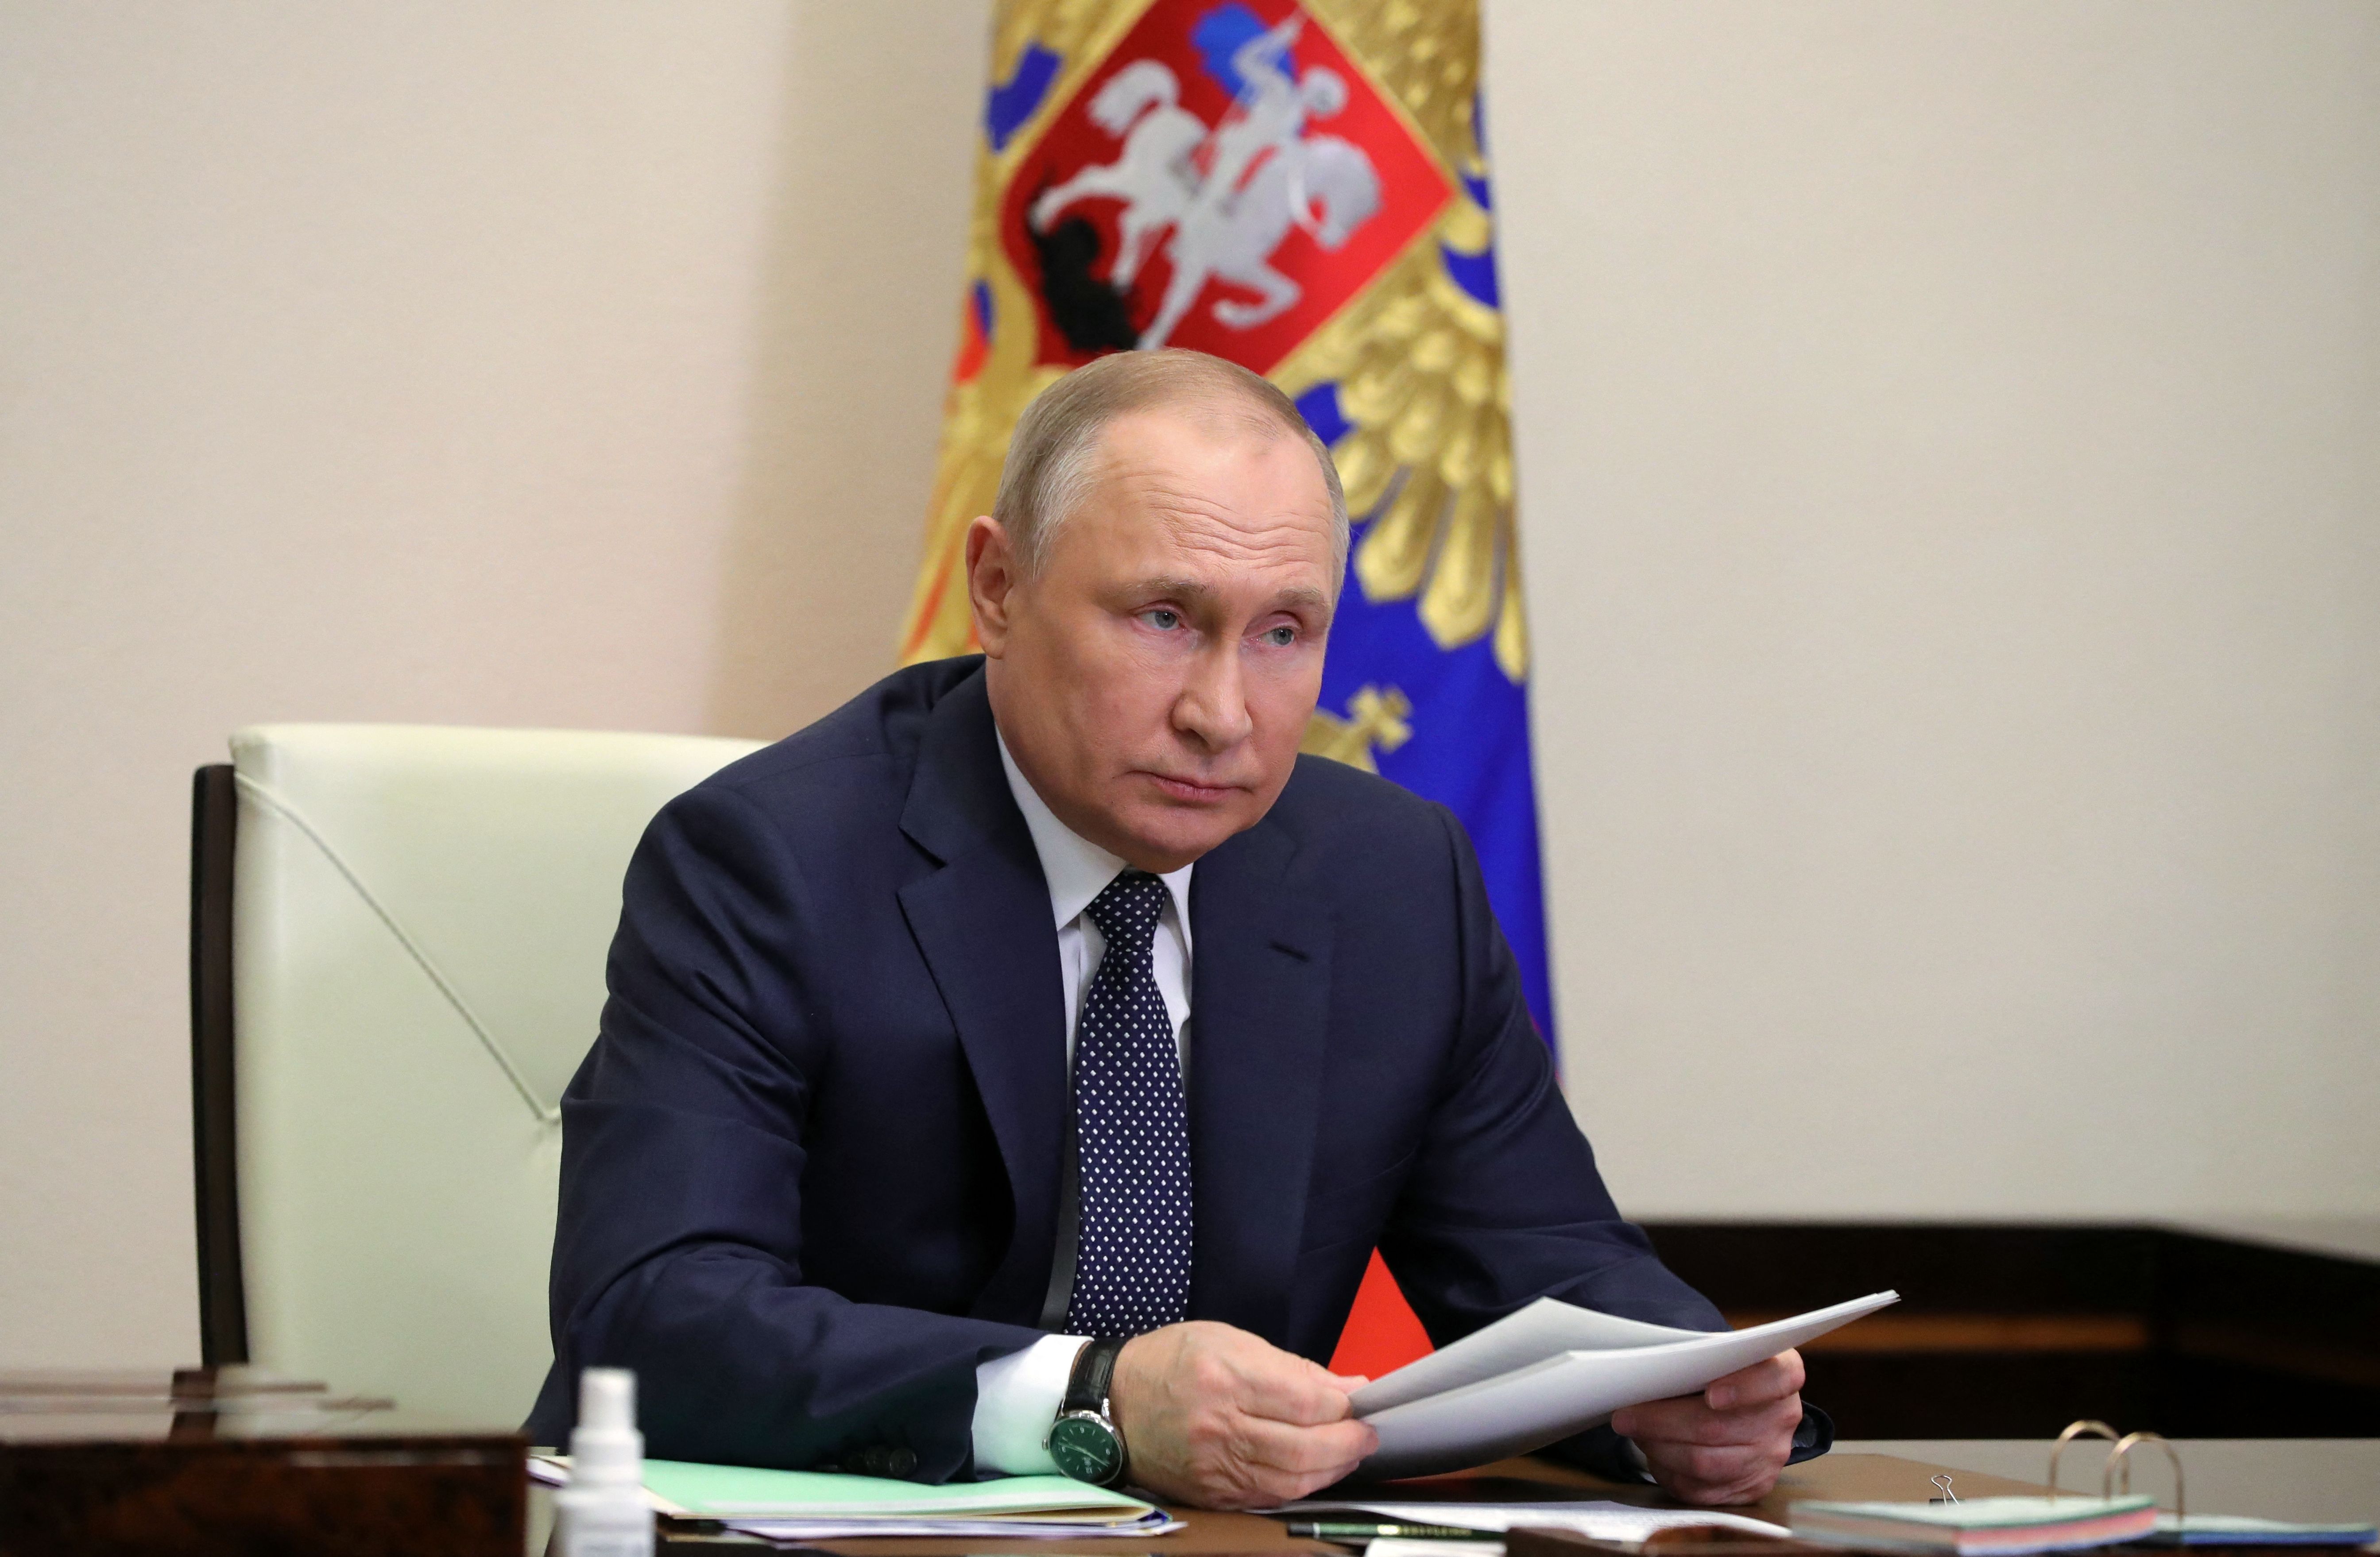 Russian President Vladimir Putin chairs a meeting on aviation via a video link at the Novo-Ogaryovo state residence outside Moscow, Russia, on March 31.